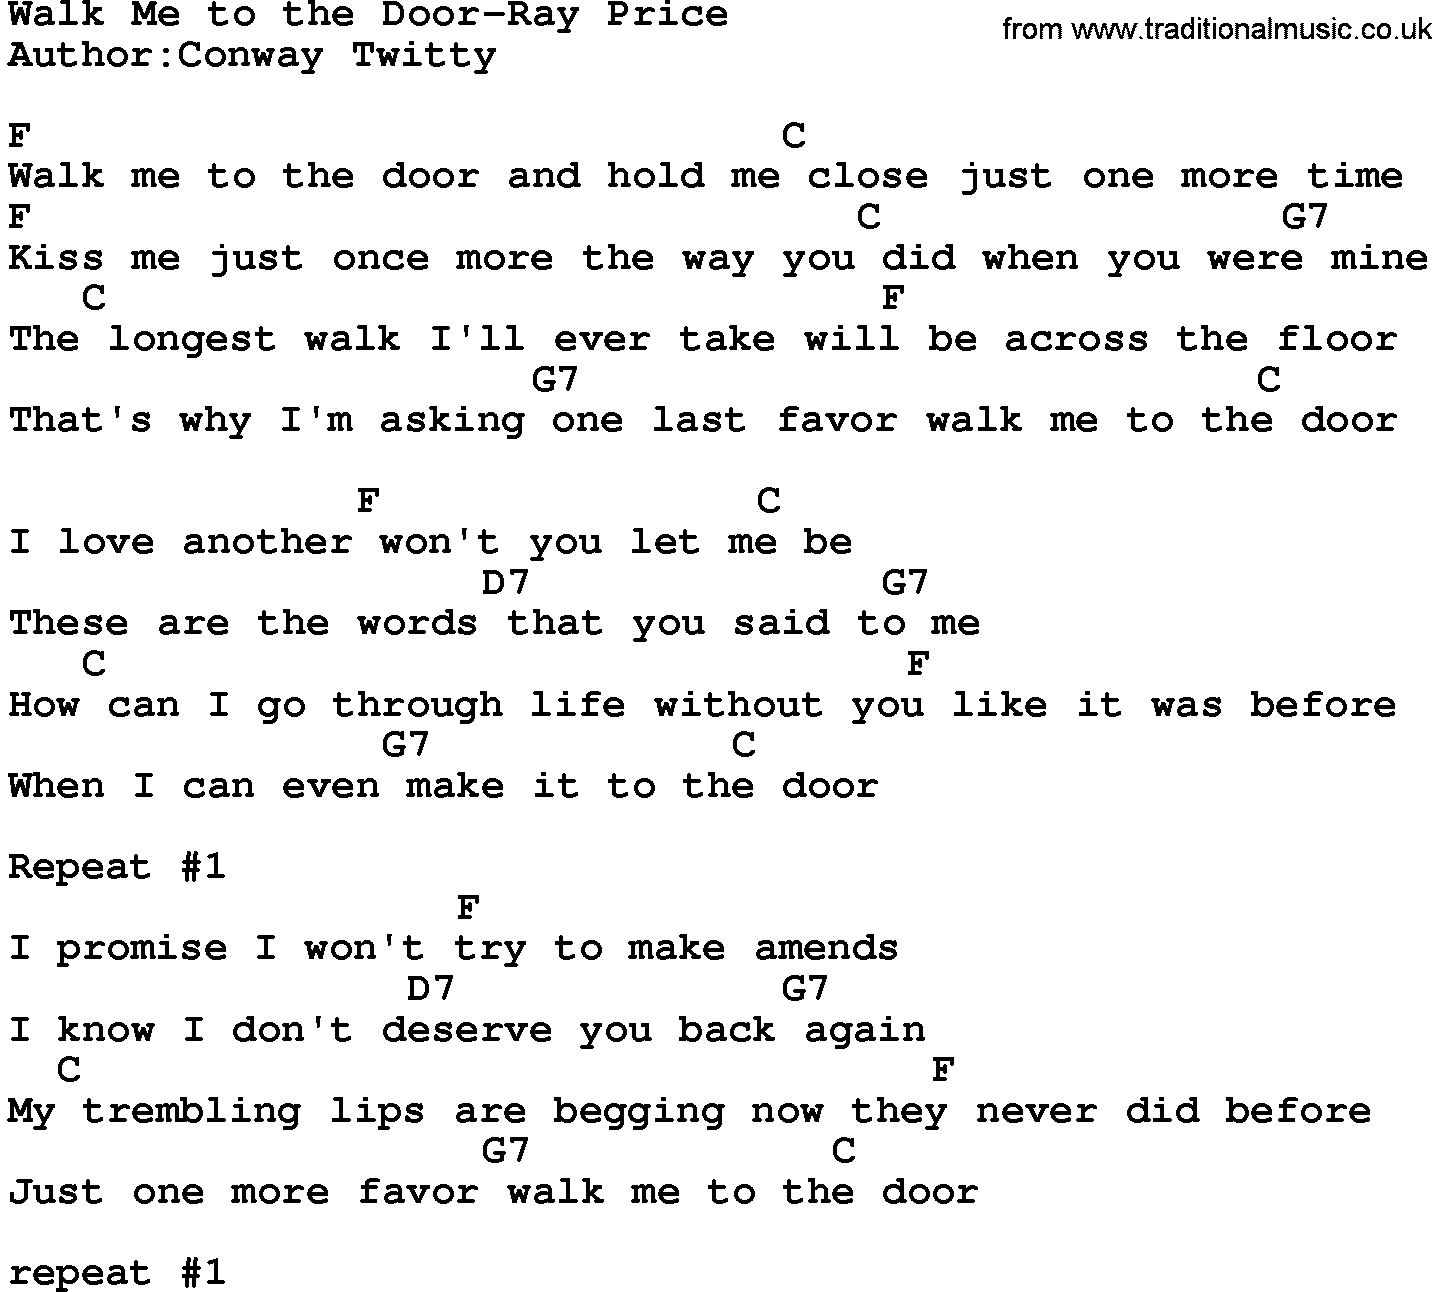 Country music song: Walk Me To The Door-Ray Price lyrics and chords